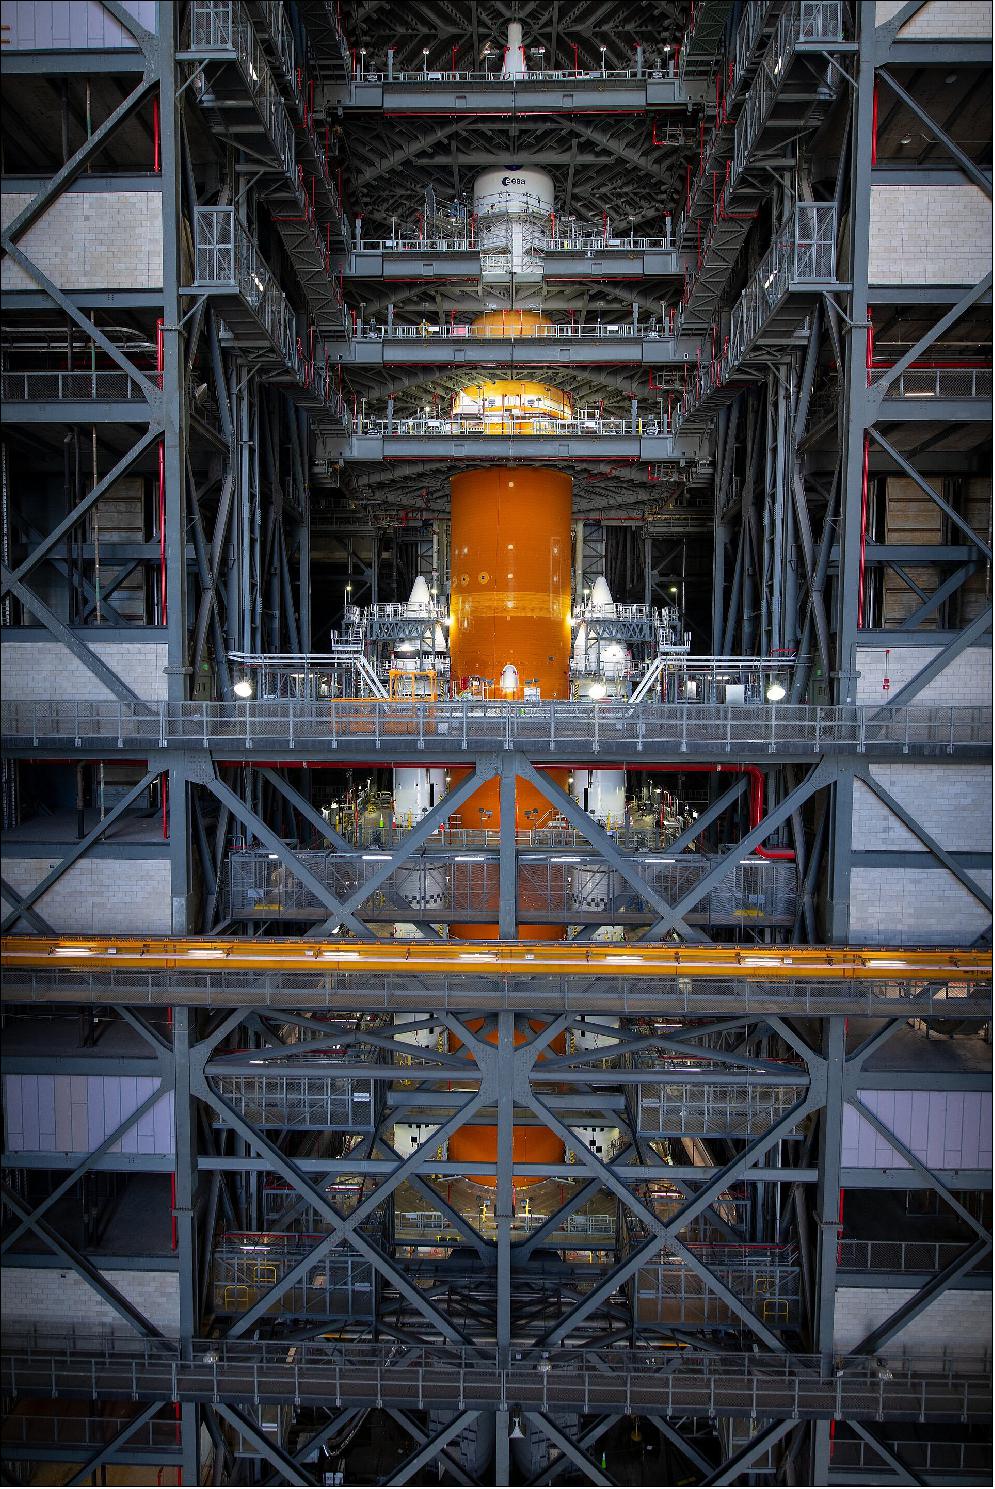 Figure 5: Orion integration on top of Moon launcher. The European Service Module that will power the first Orion uncrewed flight, ESM-1, was lifted up and mated with the rocket in preparation for launch, together with the crew module. Integration began on 20 October 2021, and the spacecraft was secured atop the powerful rocket six days later (image credit: ESA, S. Corvaja)